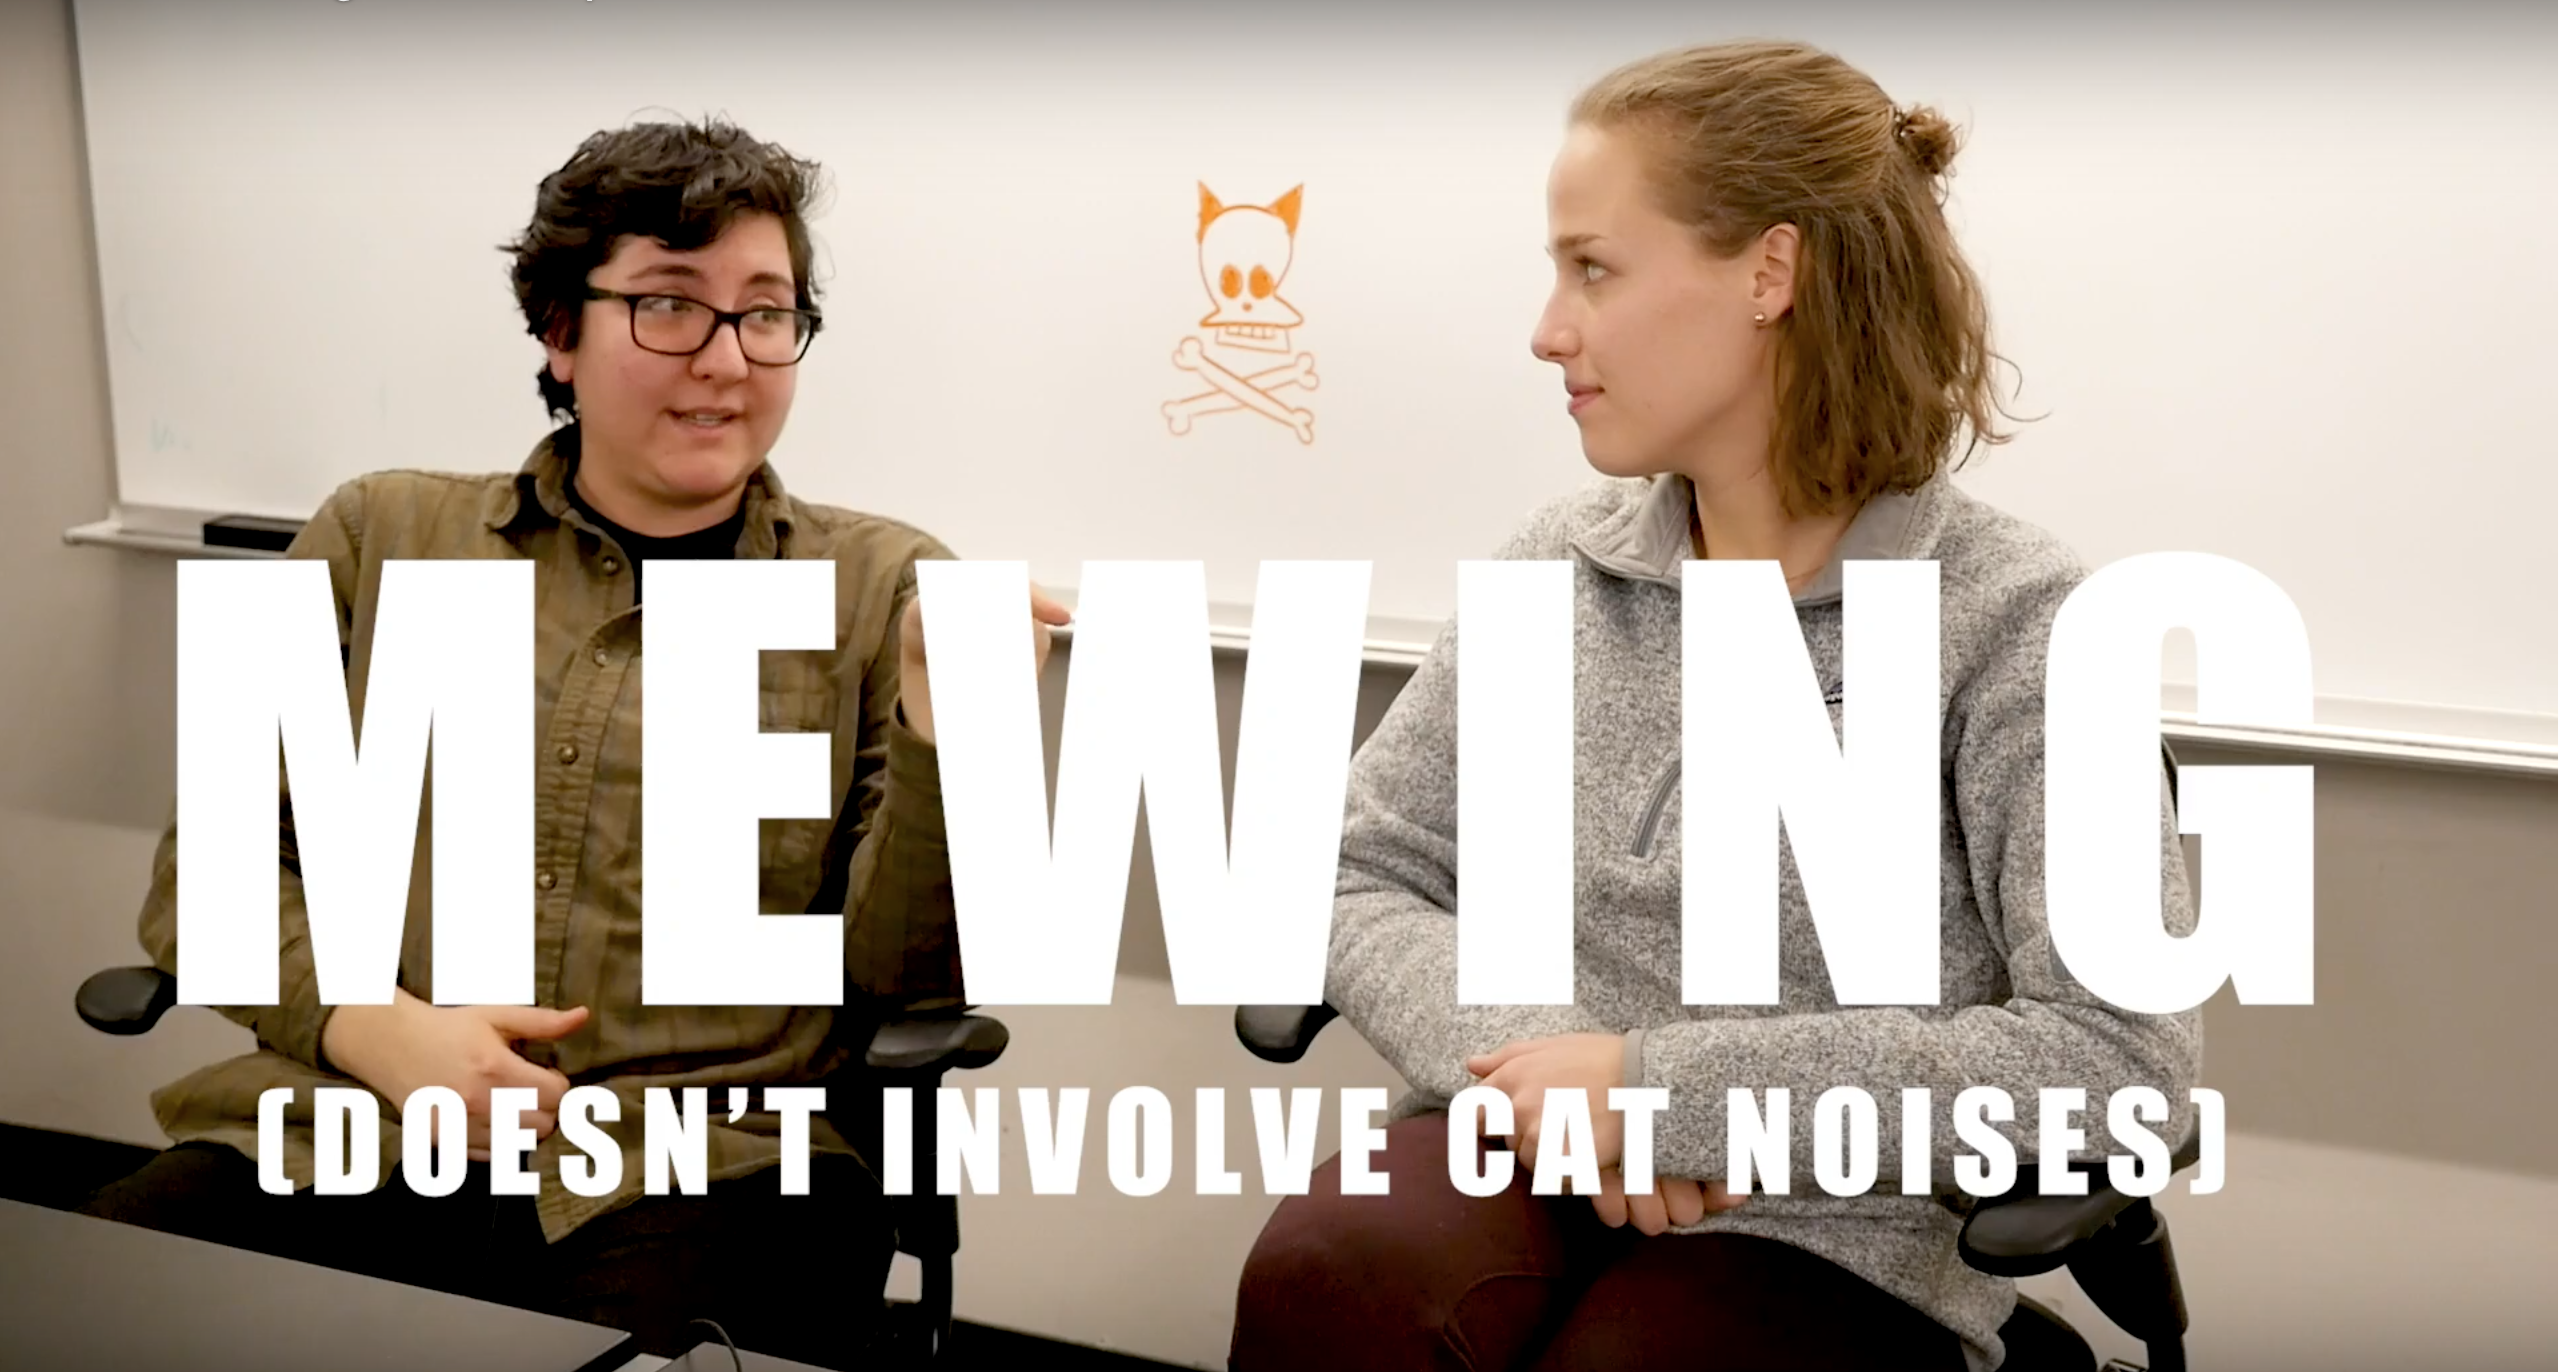 two people sit in front of a white board with "Mewing (Doesn't involve cat noises)" displayed in the text in front.